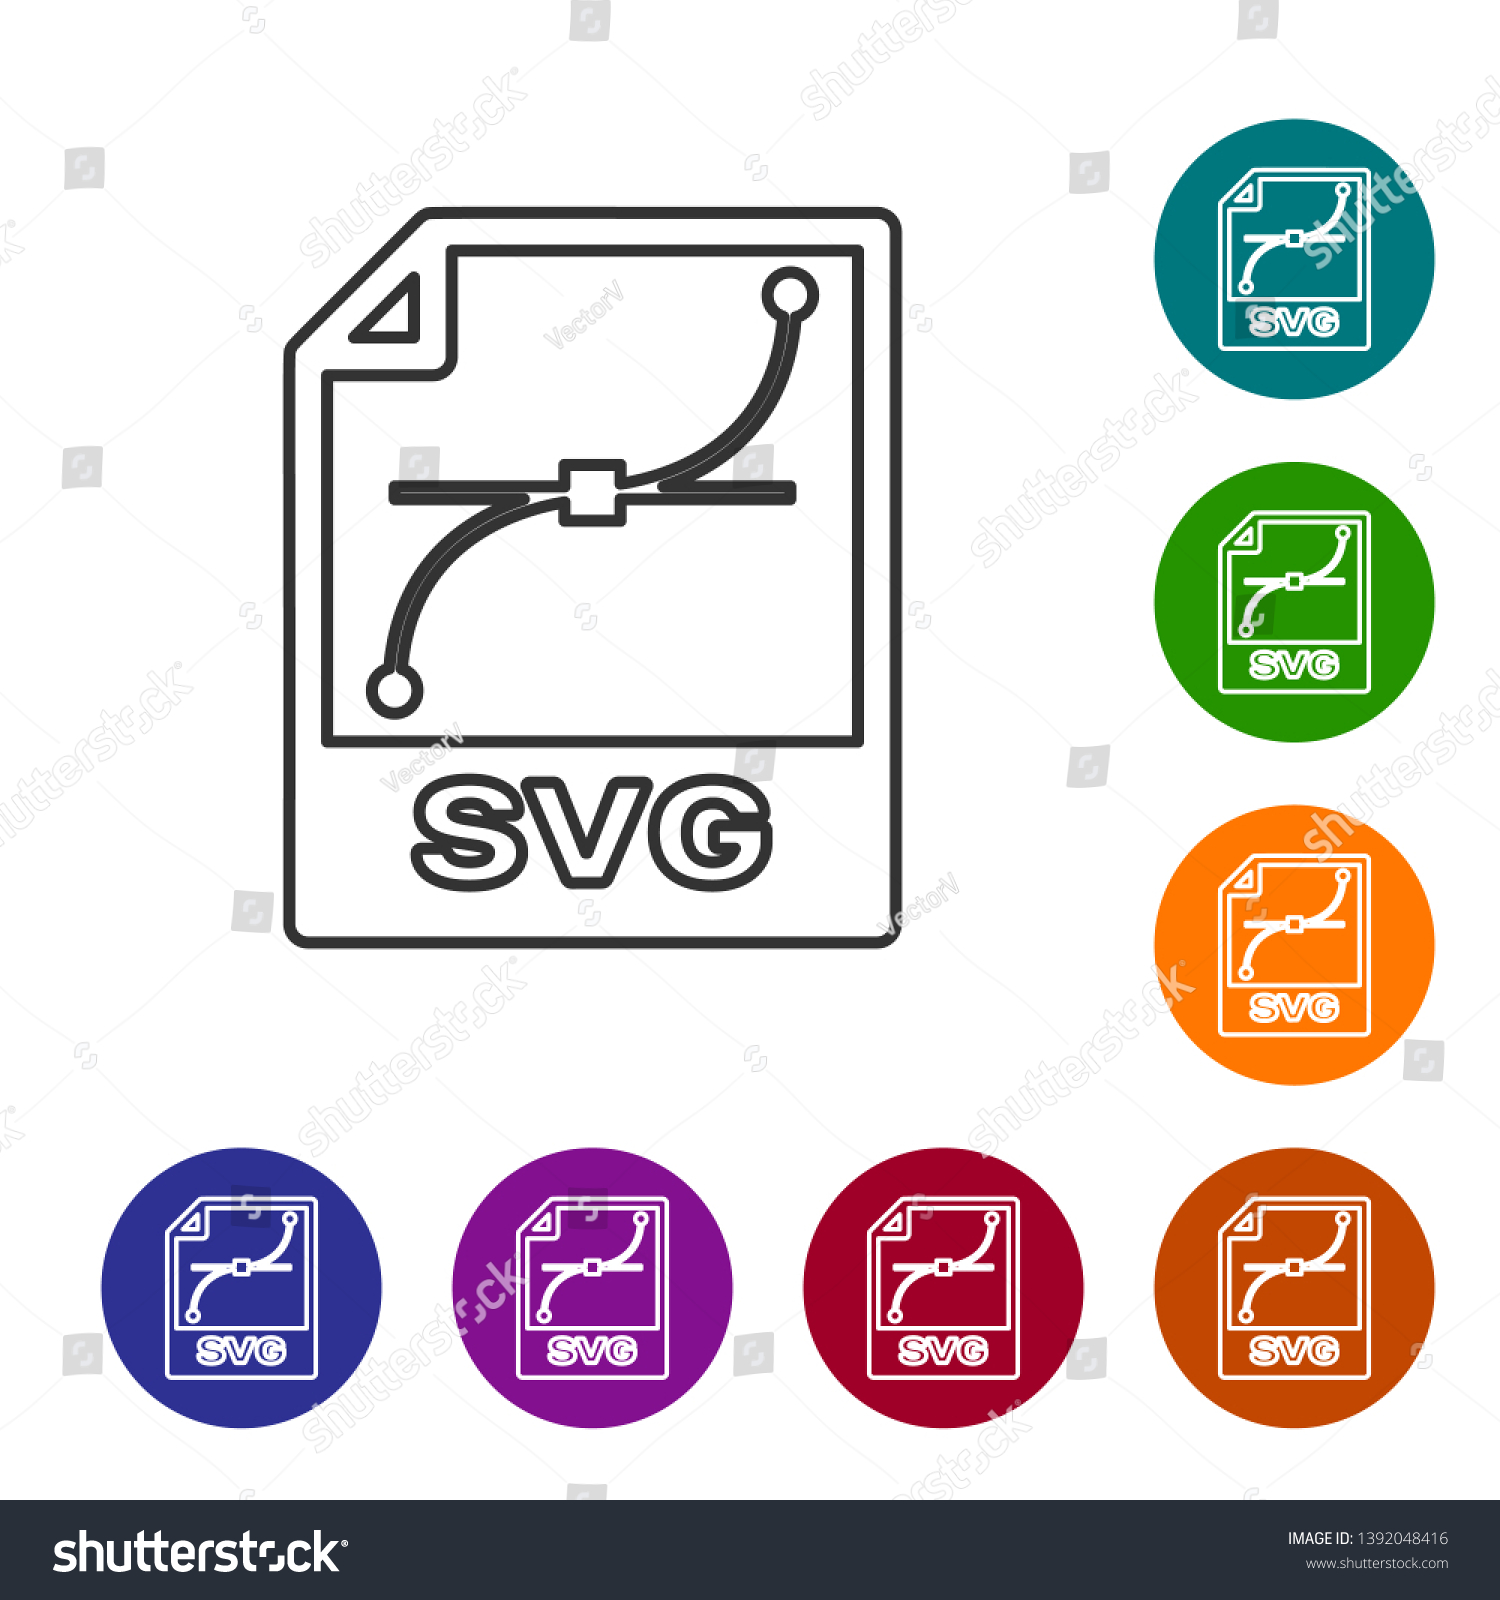 SVG of Grey SVG file document icon. Download svg button line icon isolated on white background. SVG file symbol. Set icon in color circle buttons. Vector Illustration svg